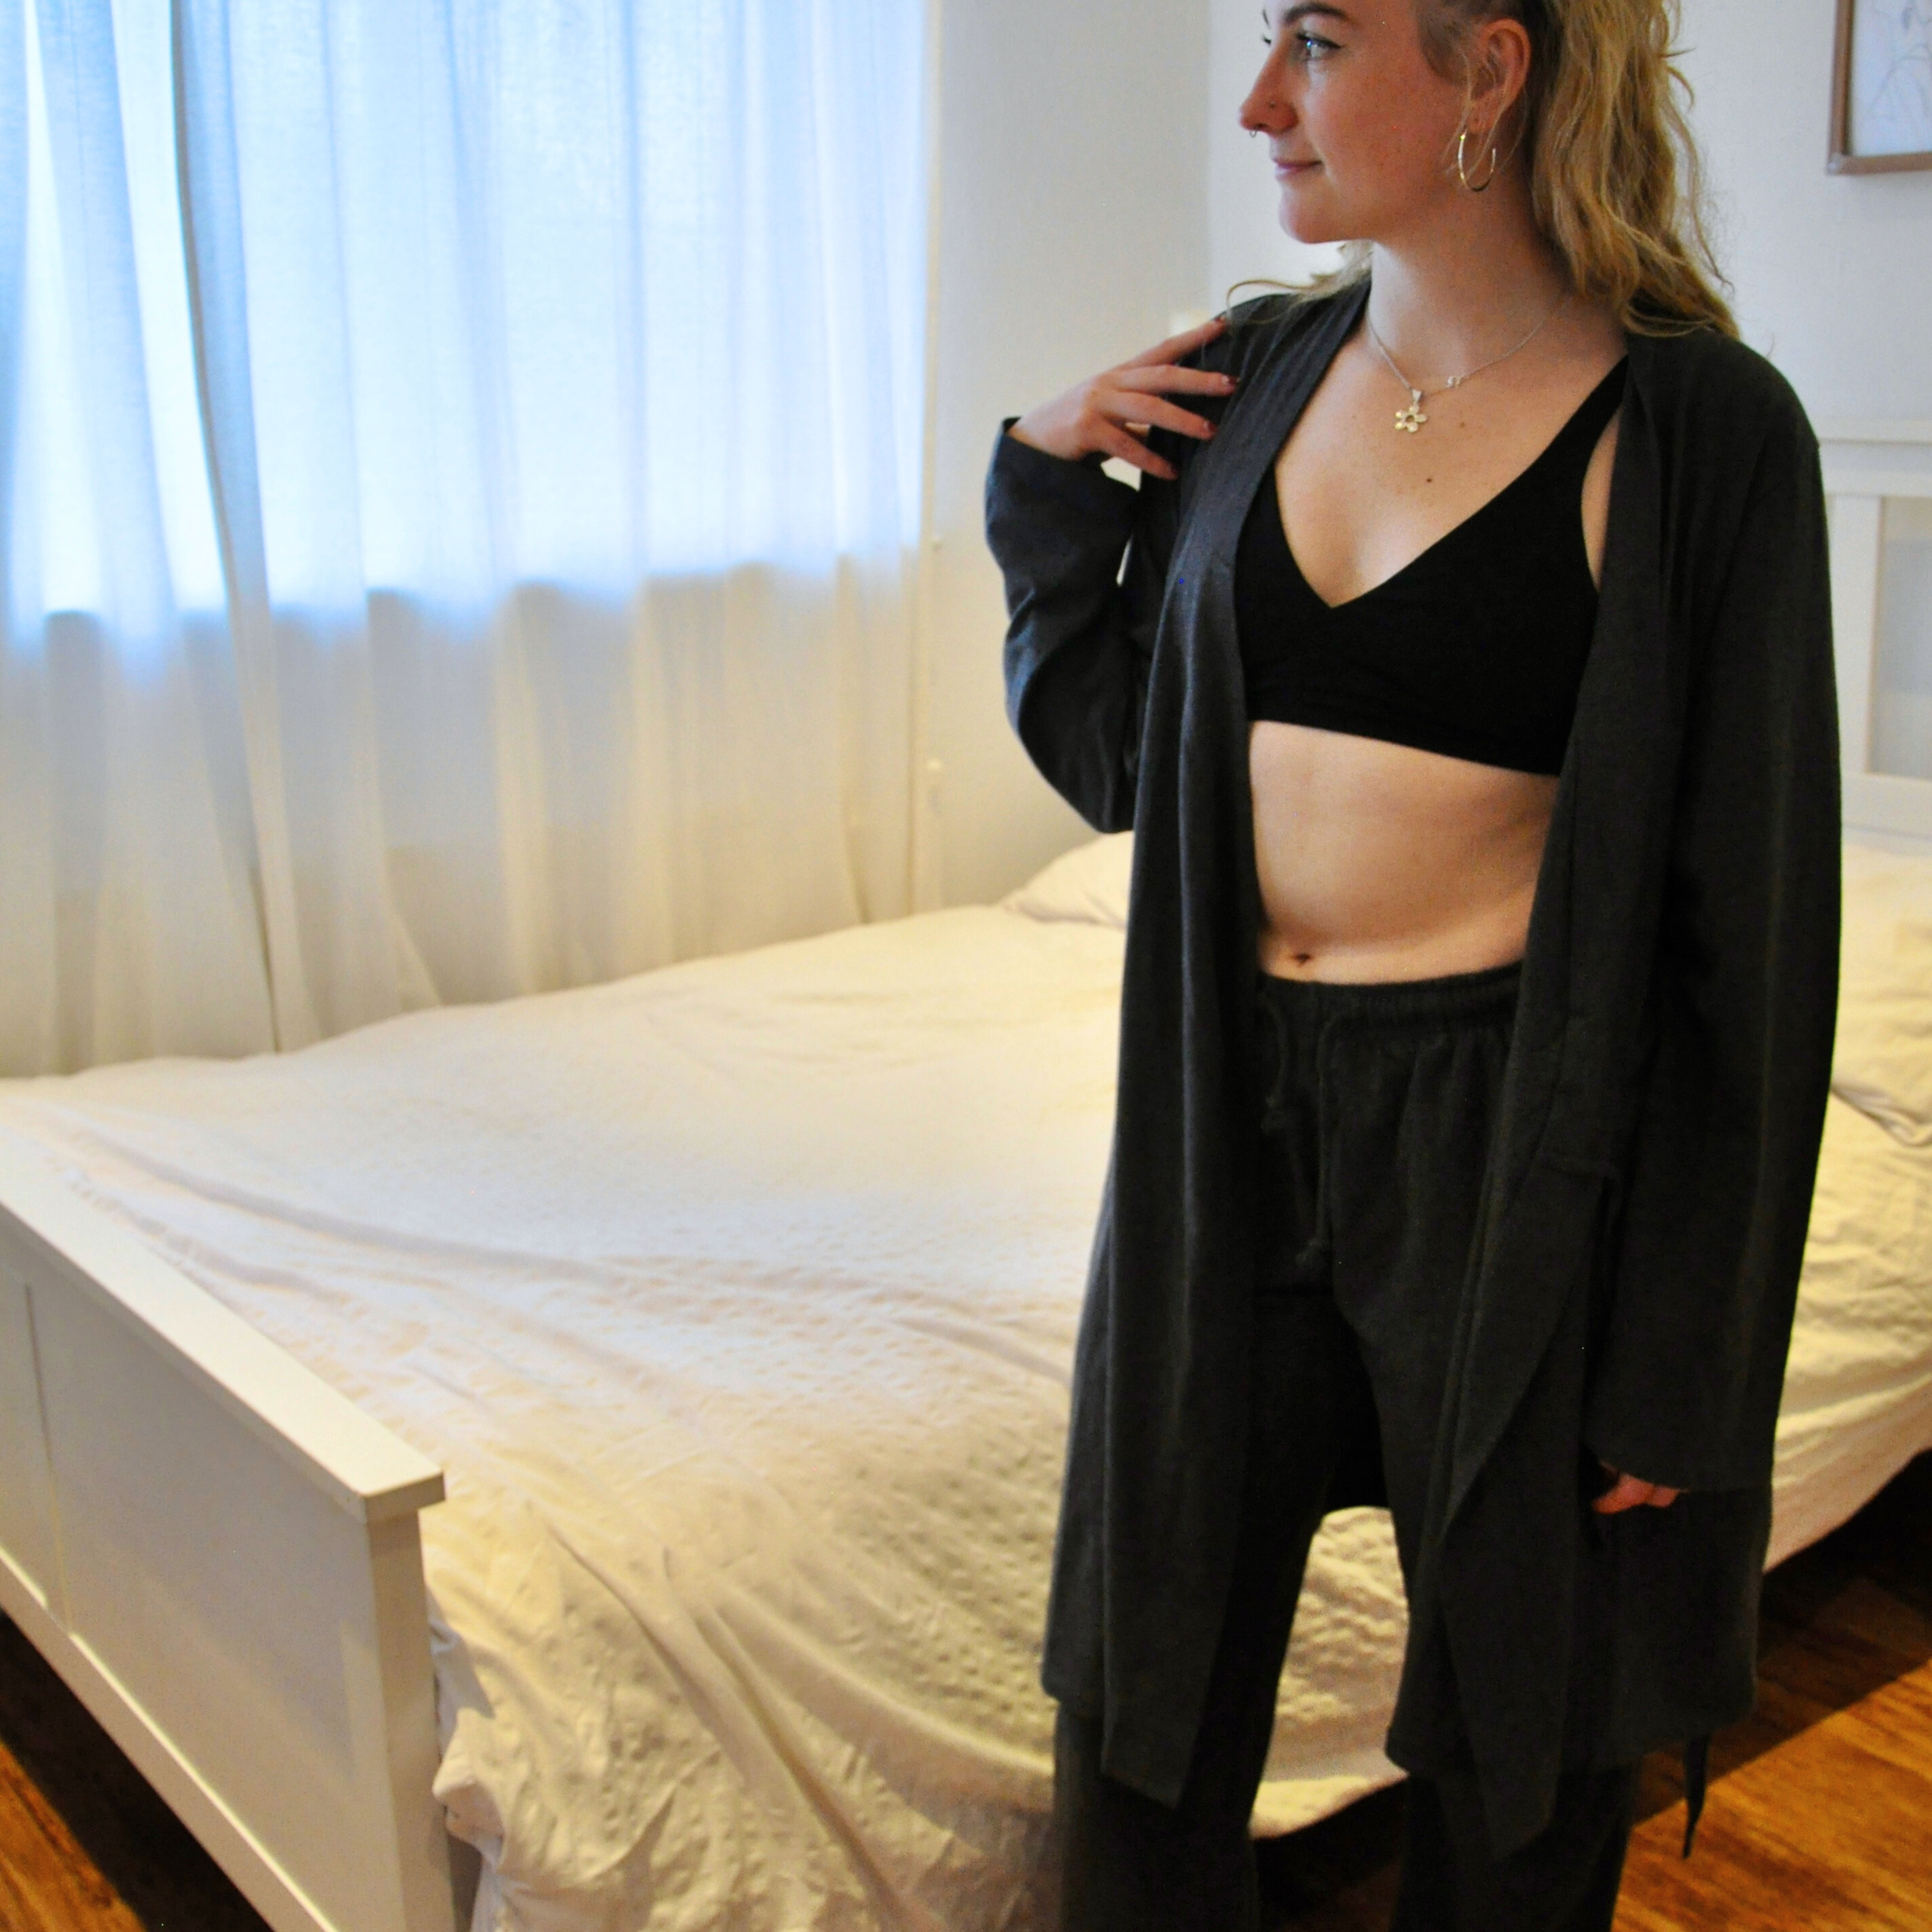 A person stands near a white bed in a room with light streaming through sheer curtains. They are wearing a black bralette, dark grey pyjama bottoms, and an open dark robe, looking to the side with one hand resting near their shoulder. The room features wooden flooring.